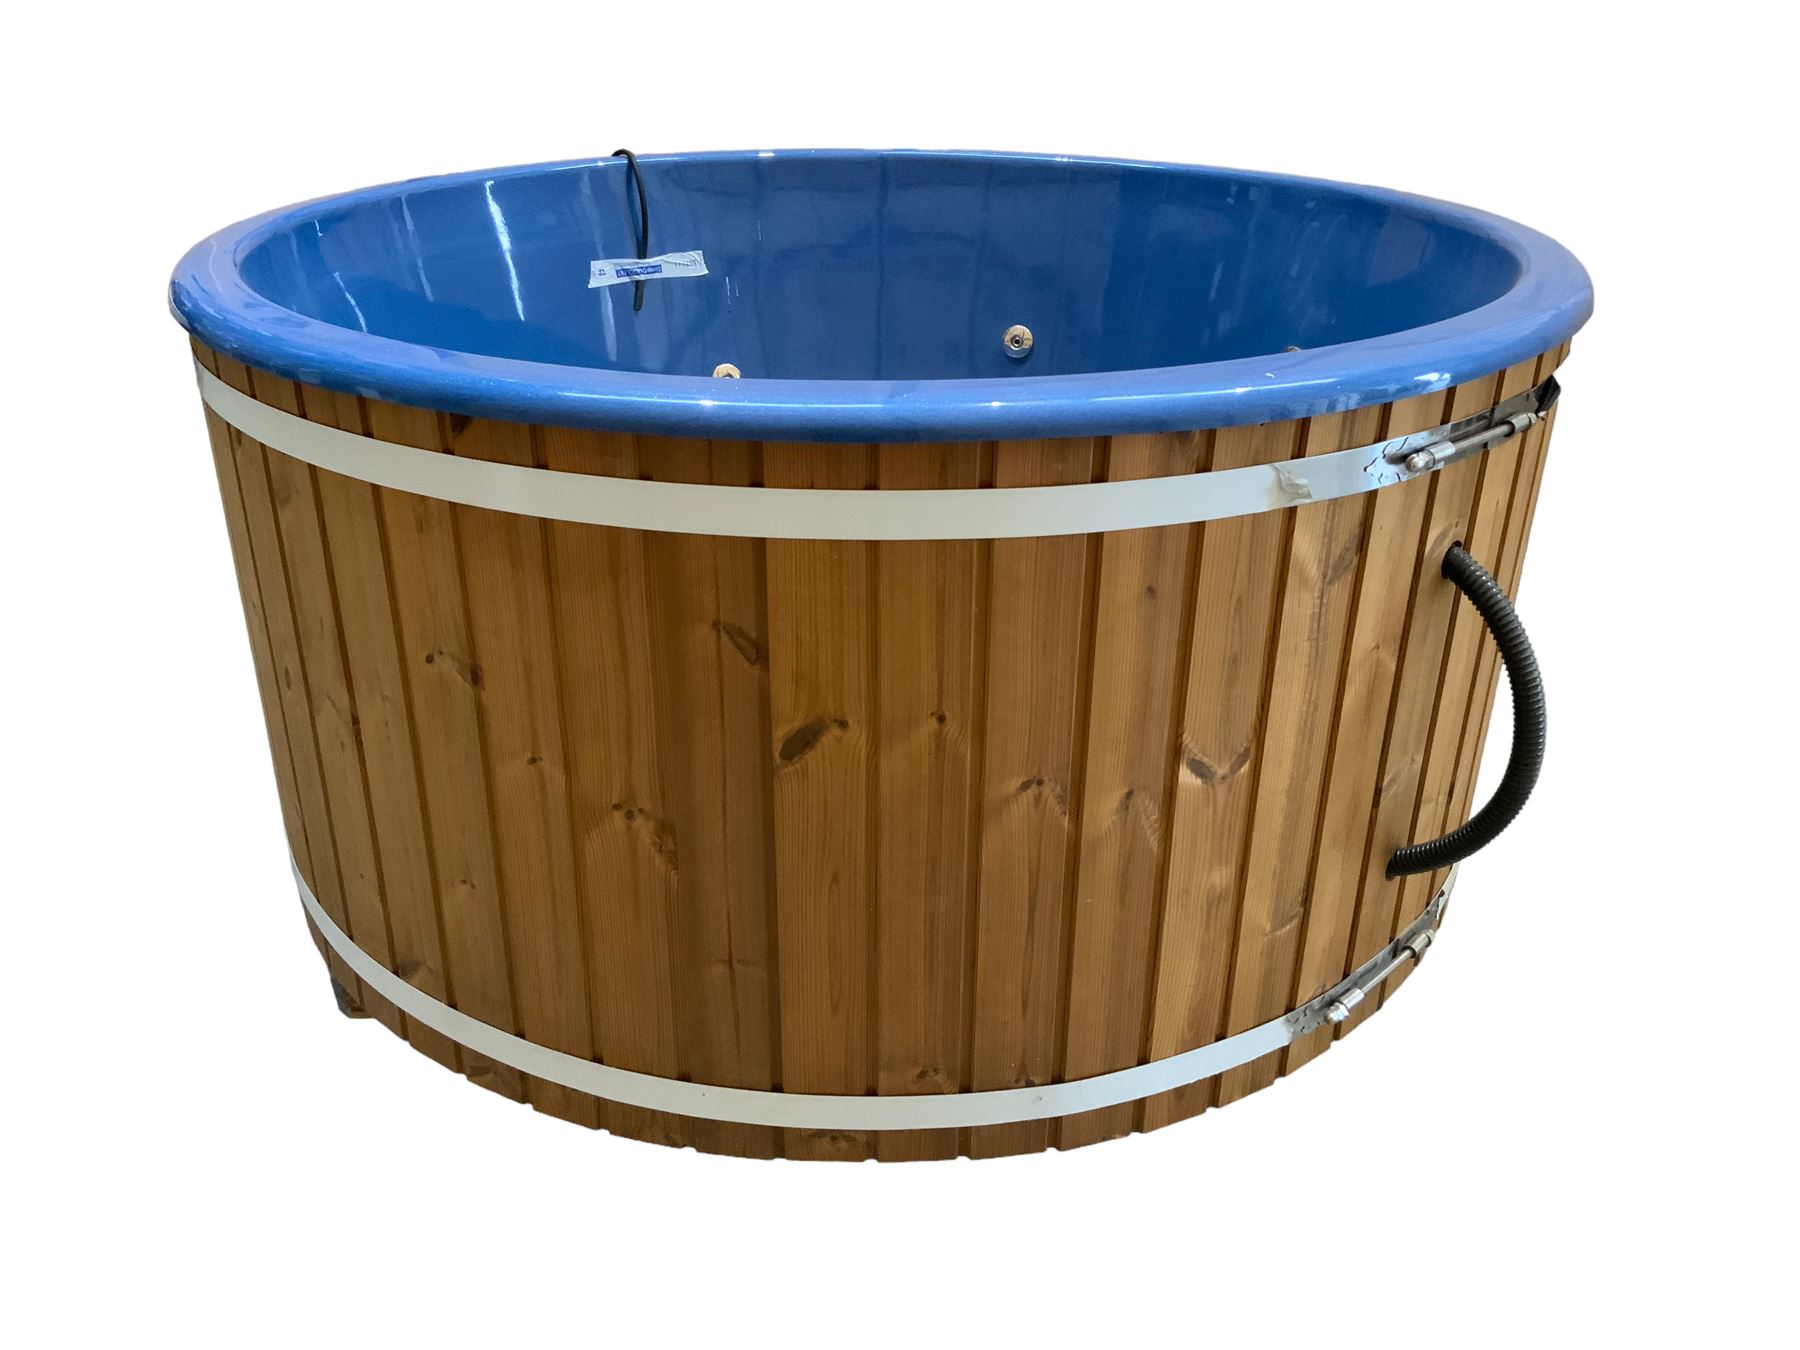 Deluxe - fibreglass circular hot tub with cover - Image 5 of 12